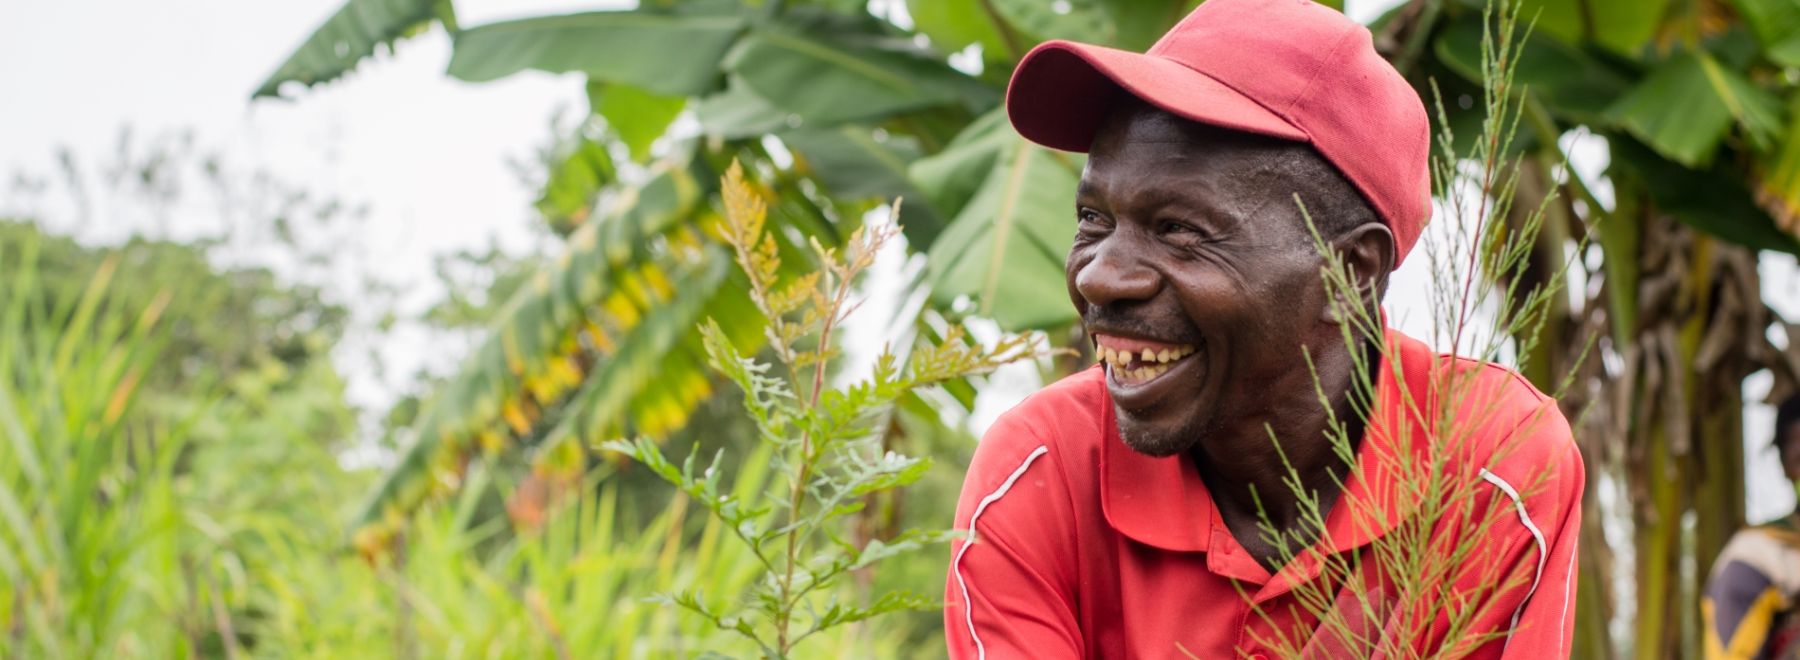 A farmer in Tanzania smiles as he holds his new tree seedlings